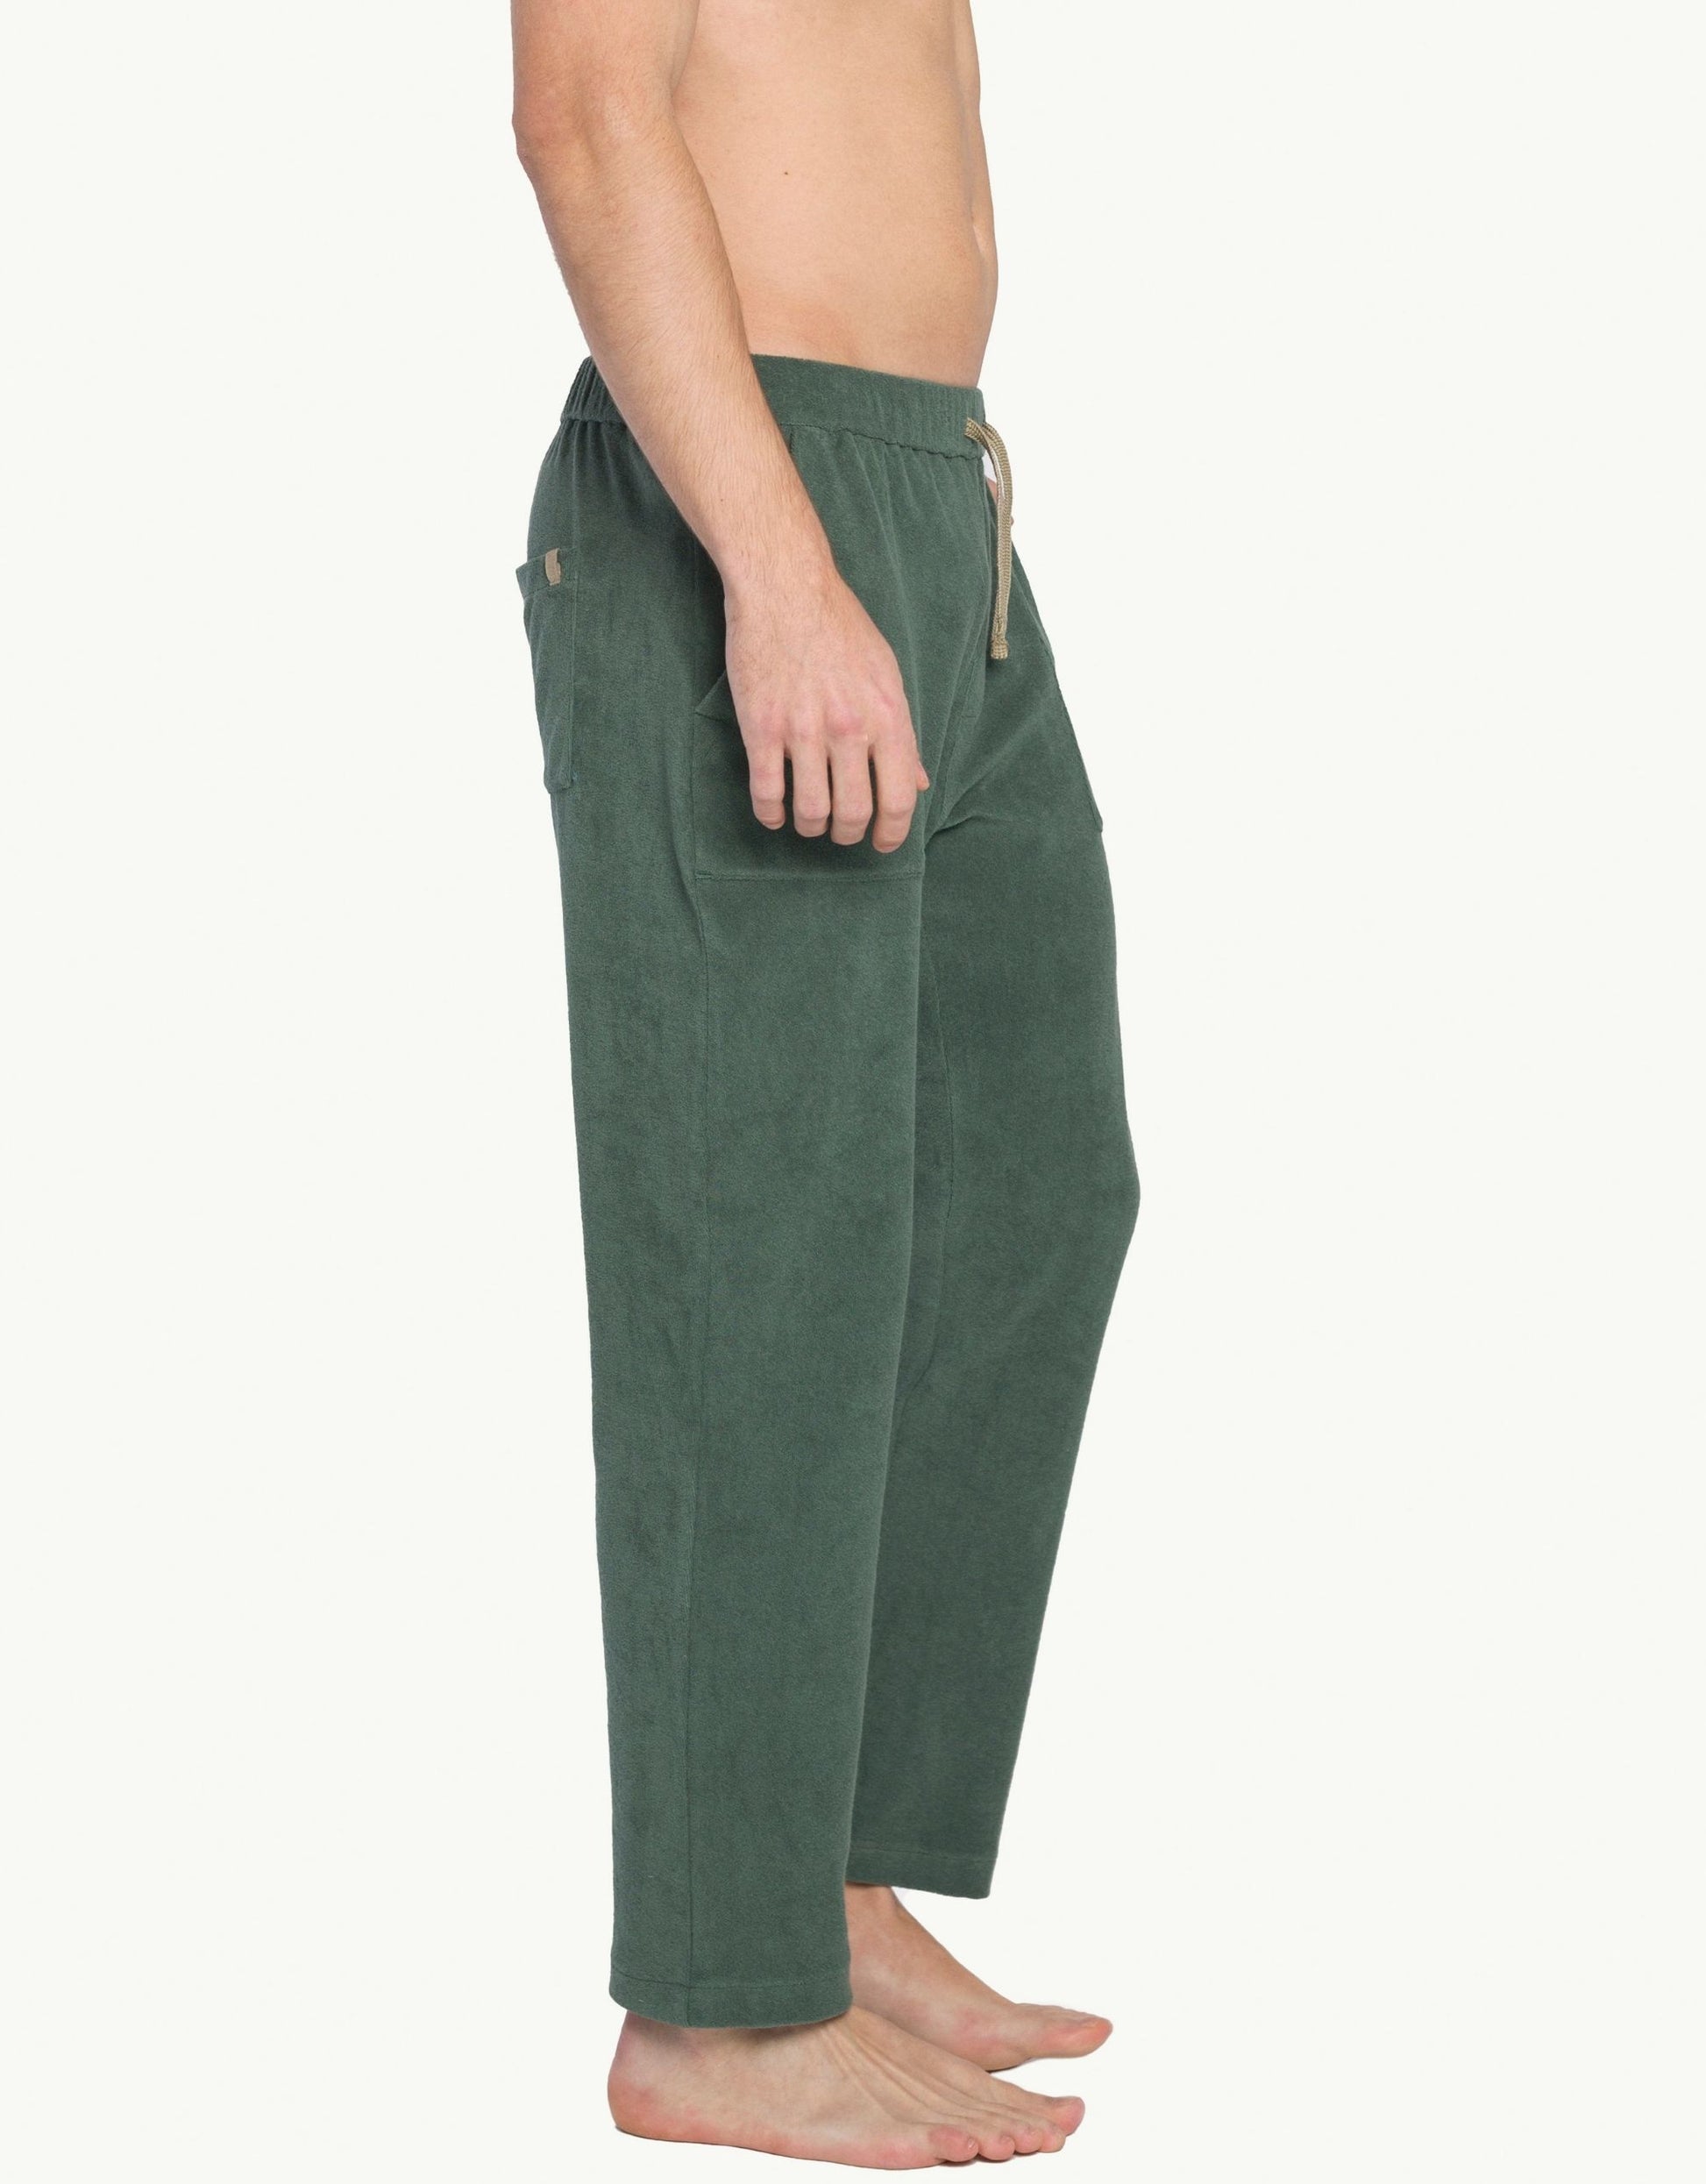 Versatile summer luxury pants with a towel-like feel, ideal for beach getaways or nights out. Made from 100% certified organic cotton in green.